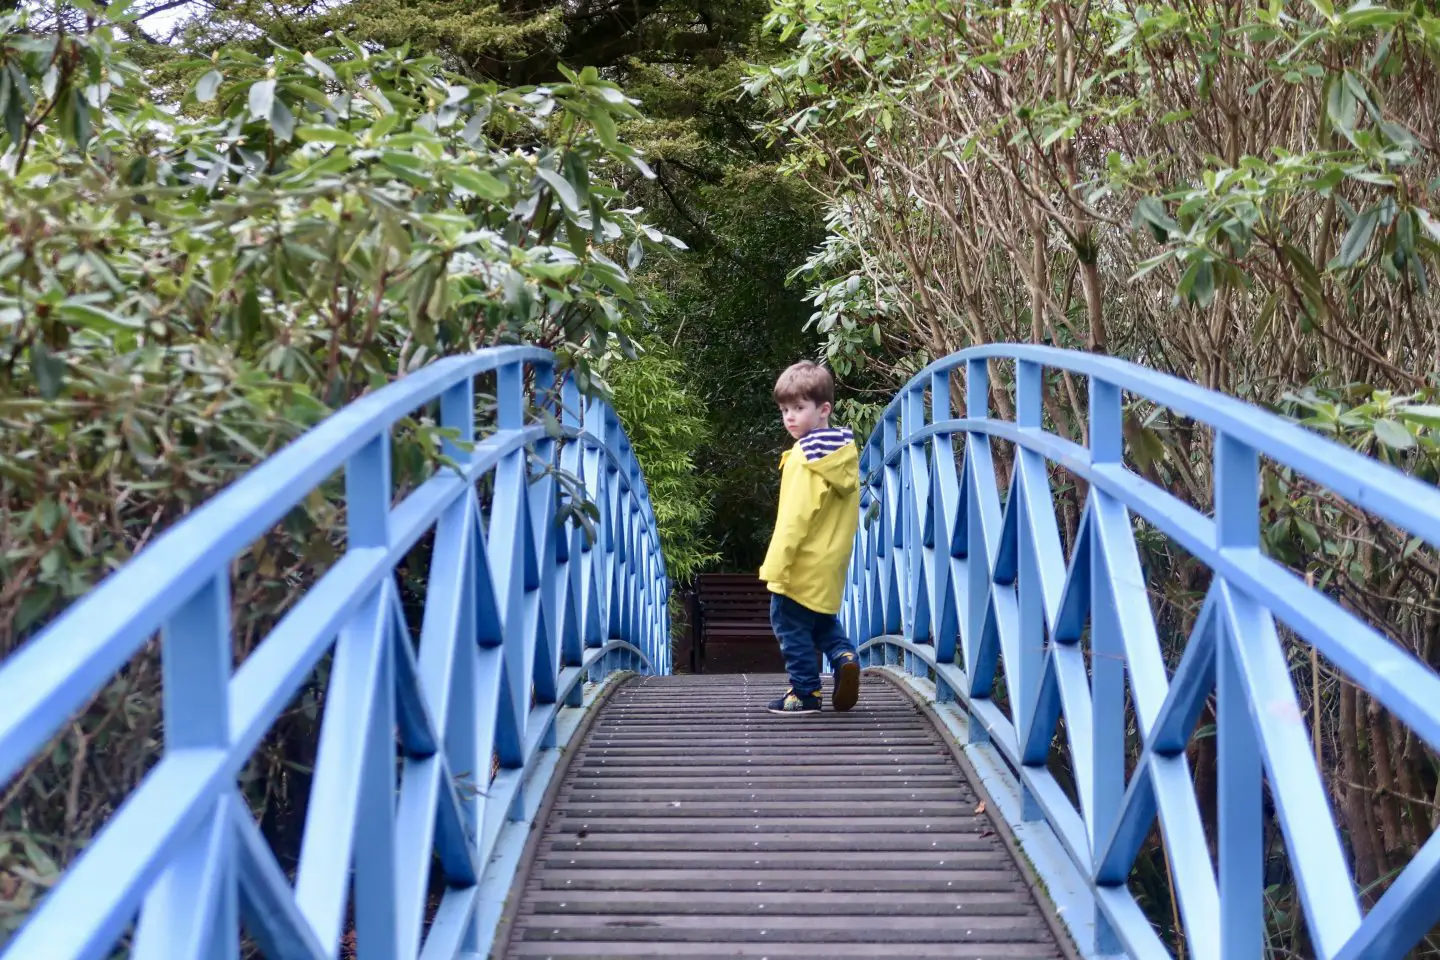 A boy standing on a bridge with blue railings, looking back towards the camera